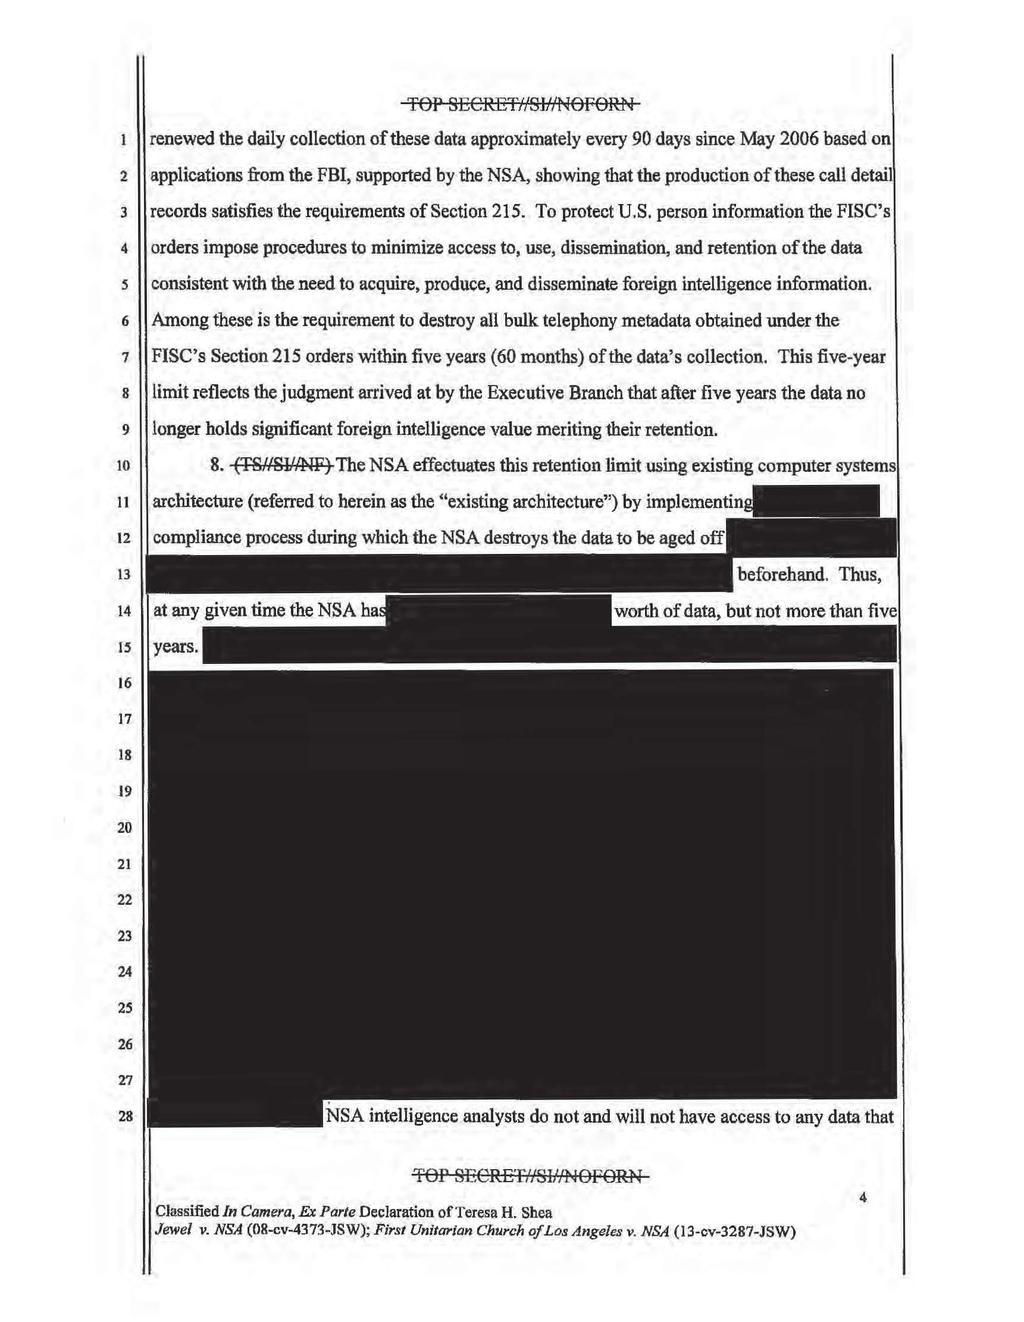 Case4:08-cv-04373-JSW Document2 Filed05/05/ Page4 of TOP SECRETHSJf/NOFORN renewed the daily collection of these data approximately every 0 days since May 06 based 2 applications from the FBI,